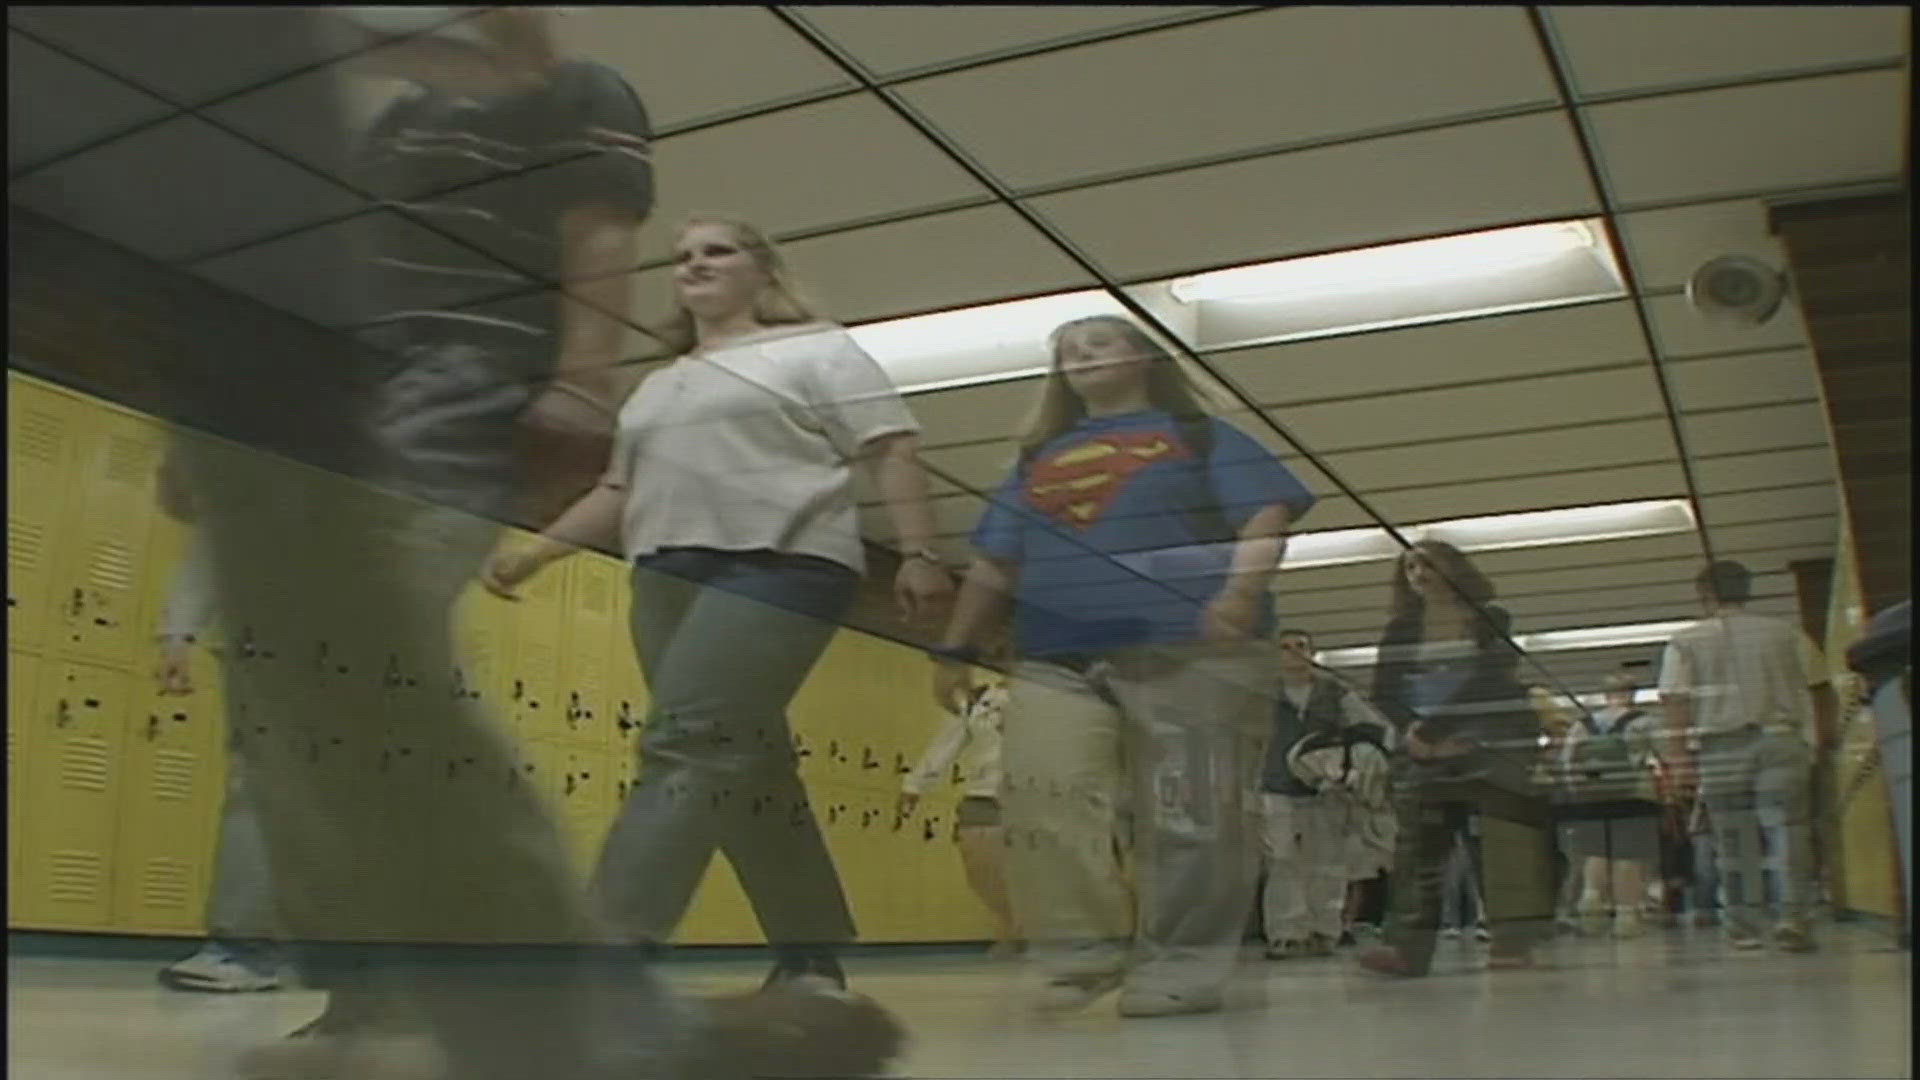 KTVB revisits the story of a 1988 kindergarten class graduating high school 12 years later to become the class of a new millennium.